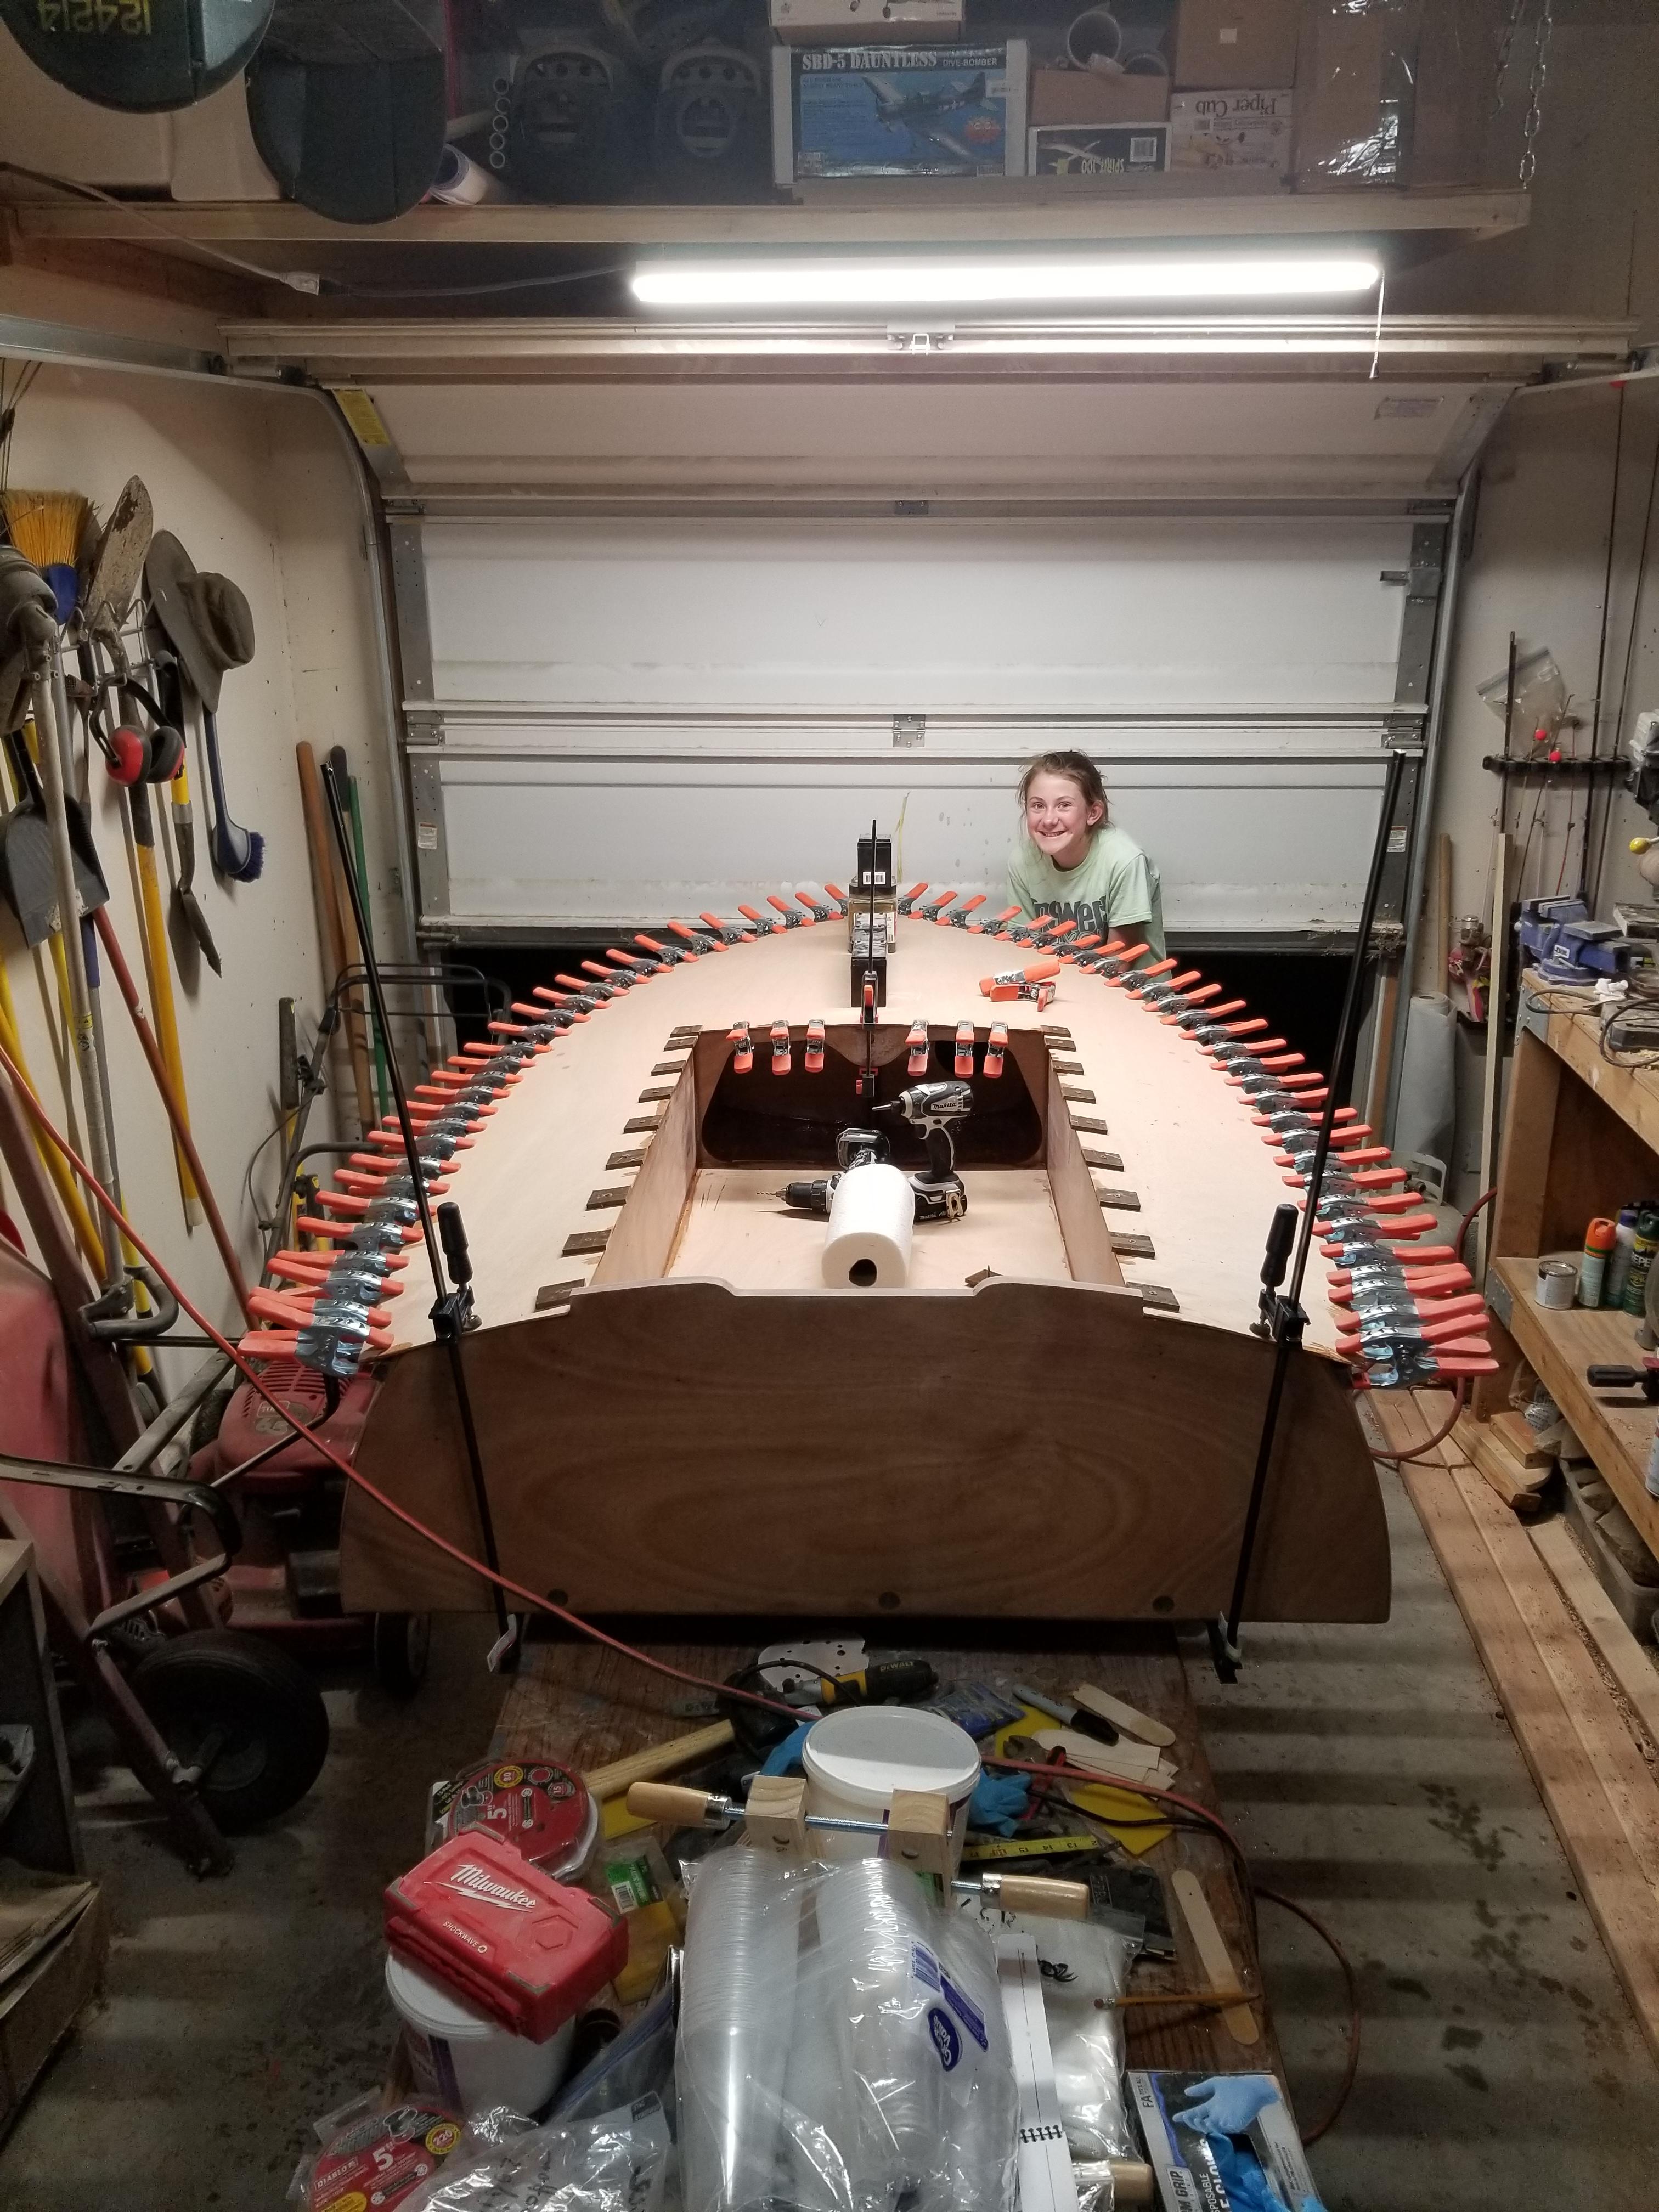 Glued the top down